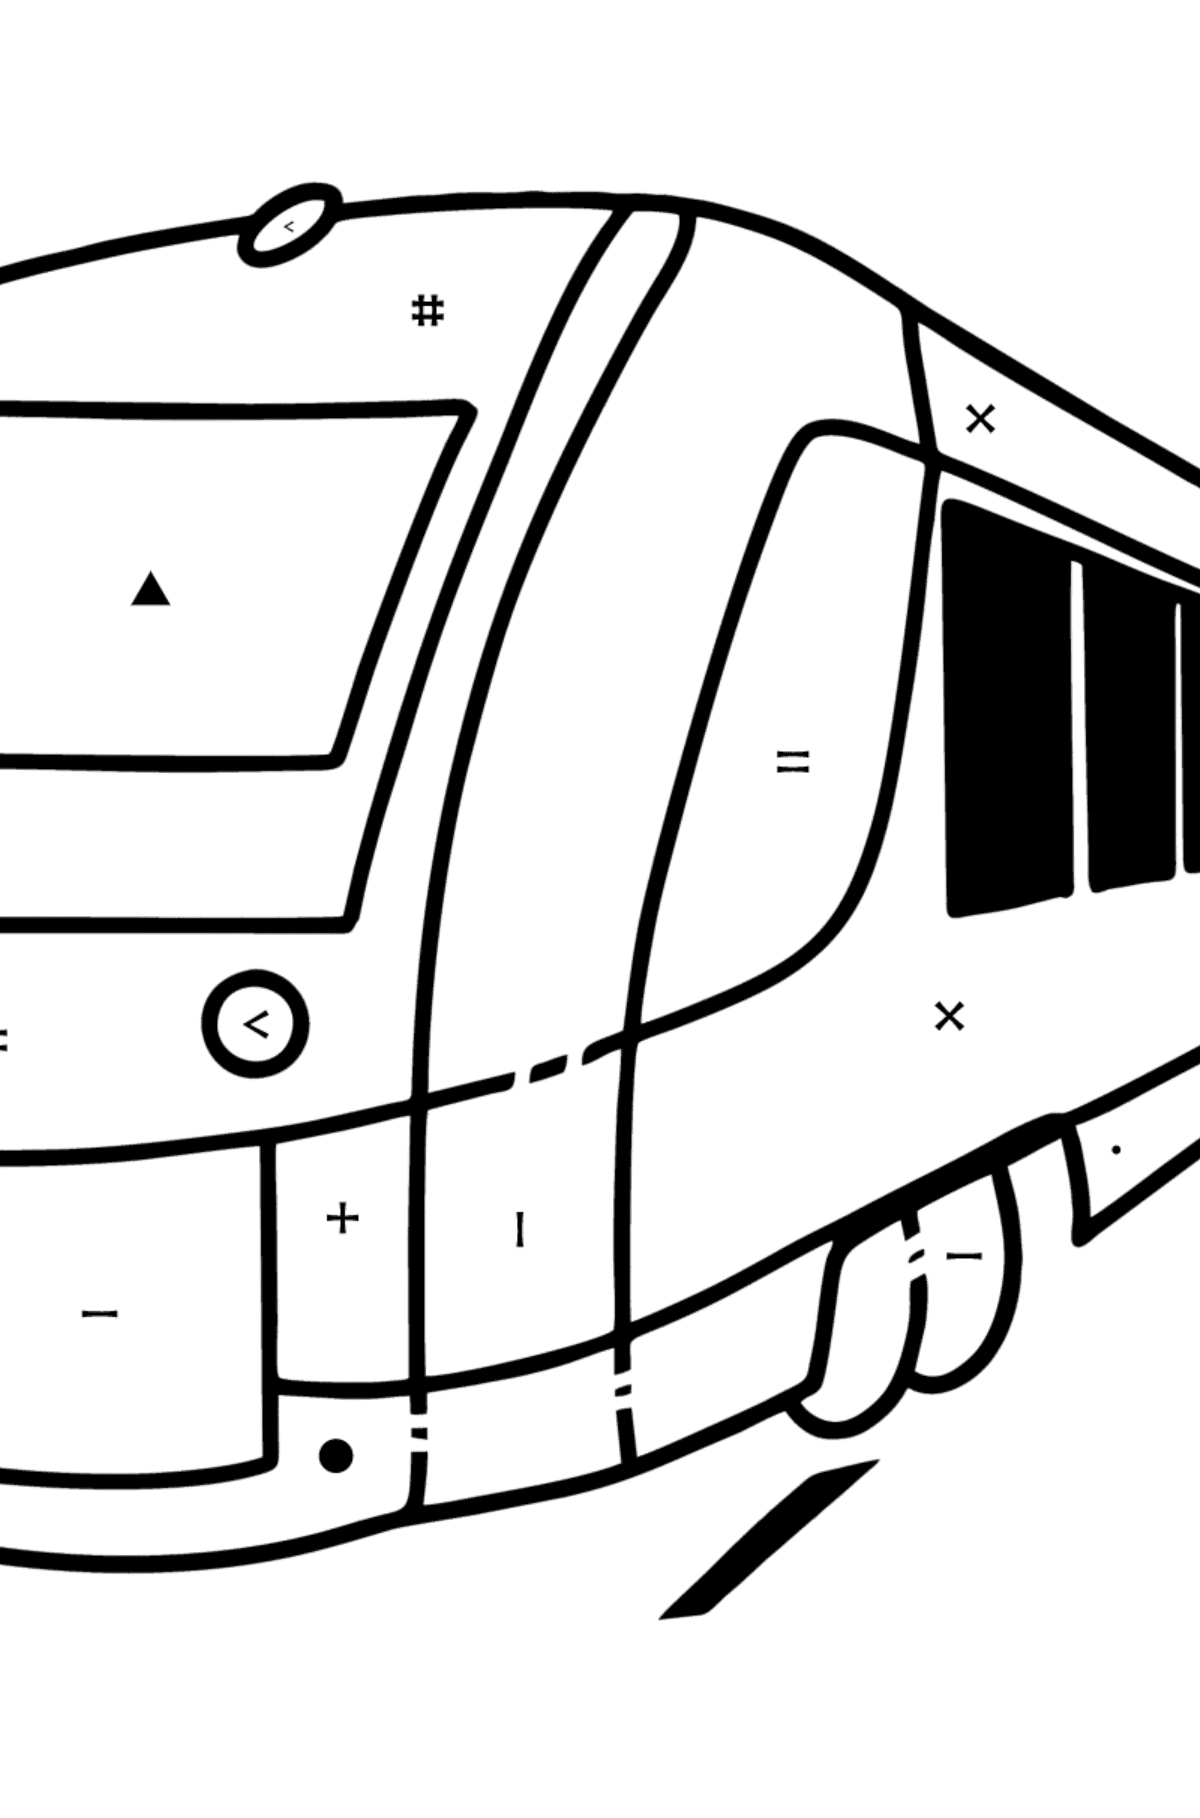 City Train coloring page - Coloring by Symbols for Kids